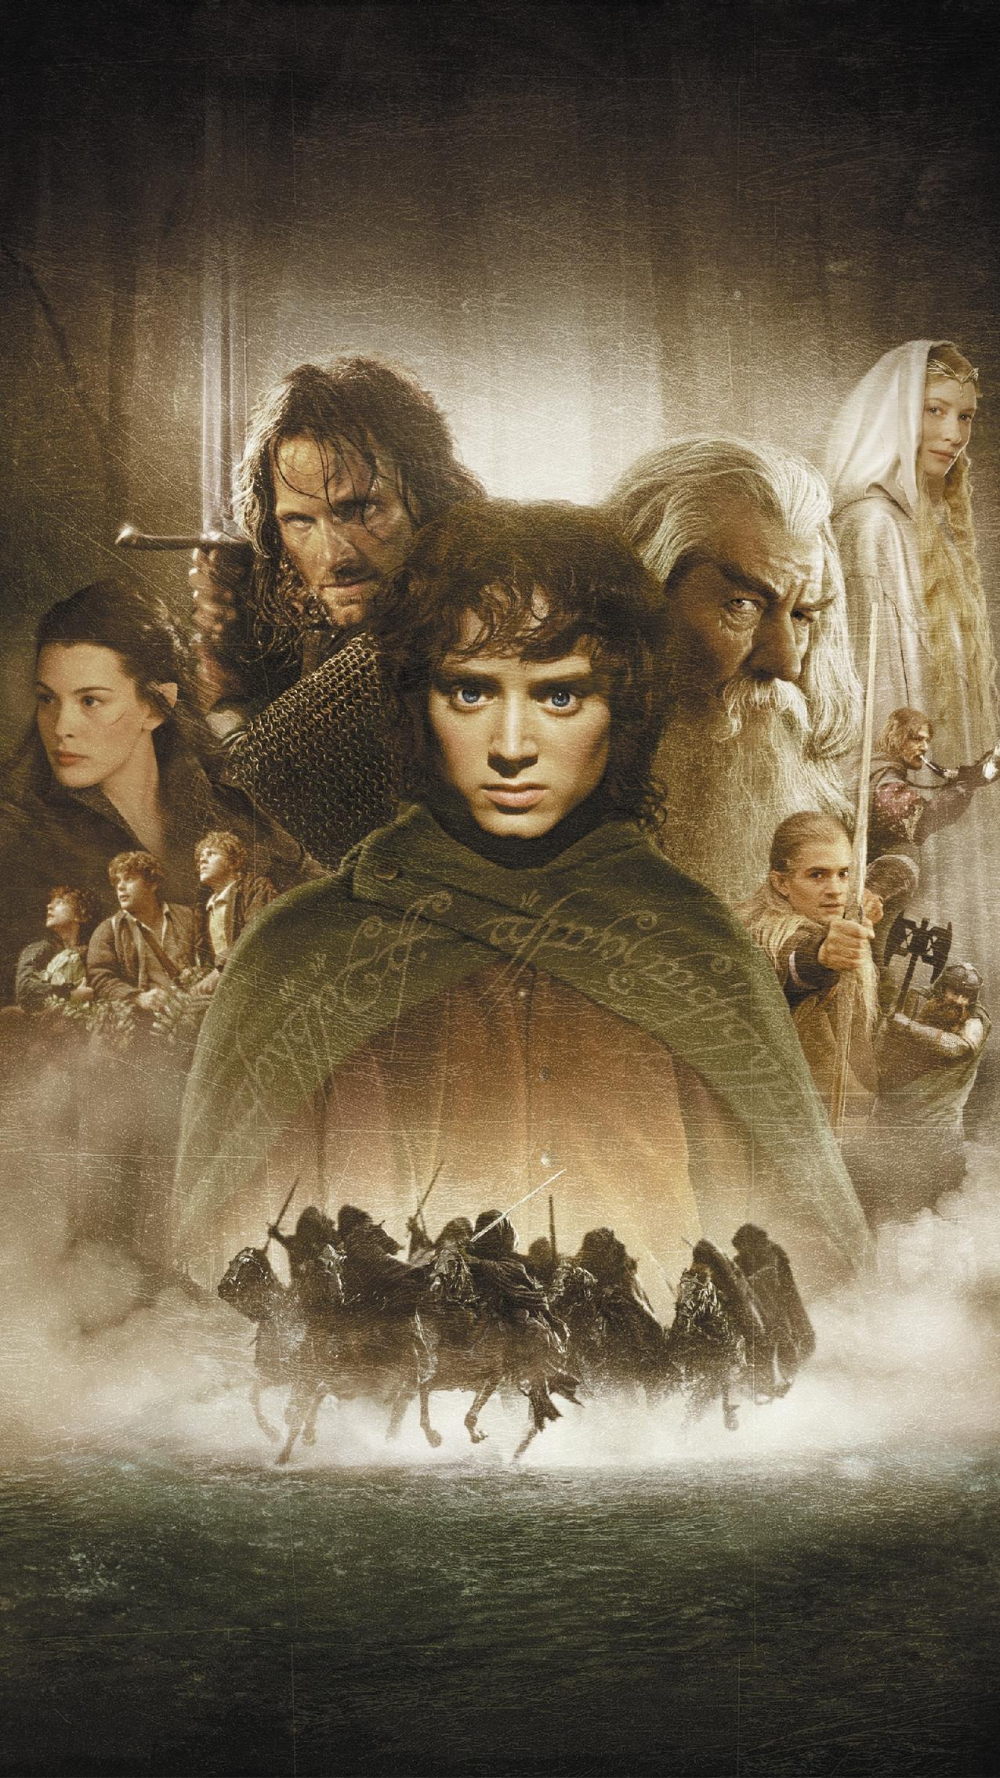 The Lord of the Rings & The Hobbit Phone Wallpaper. Moviemania. Fellowship of the ring, The hobbit, Lotr art